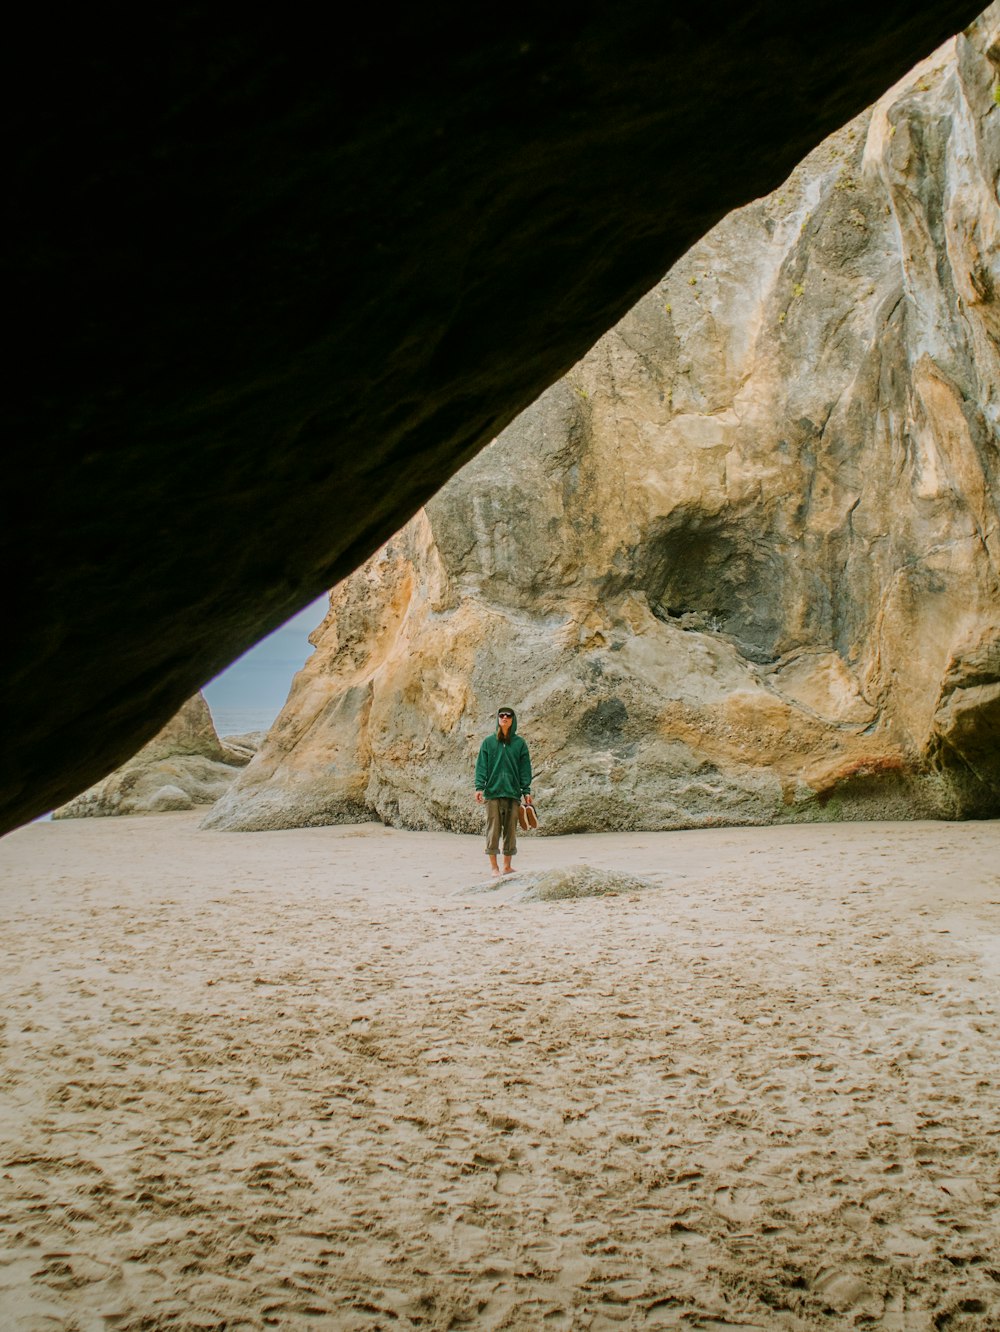 a person standing in the sand under a large rock